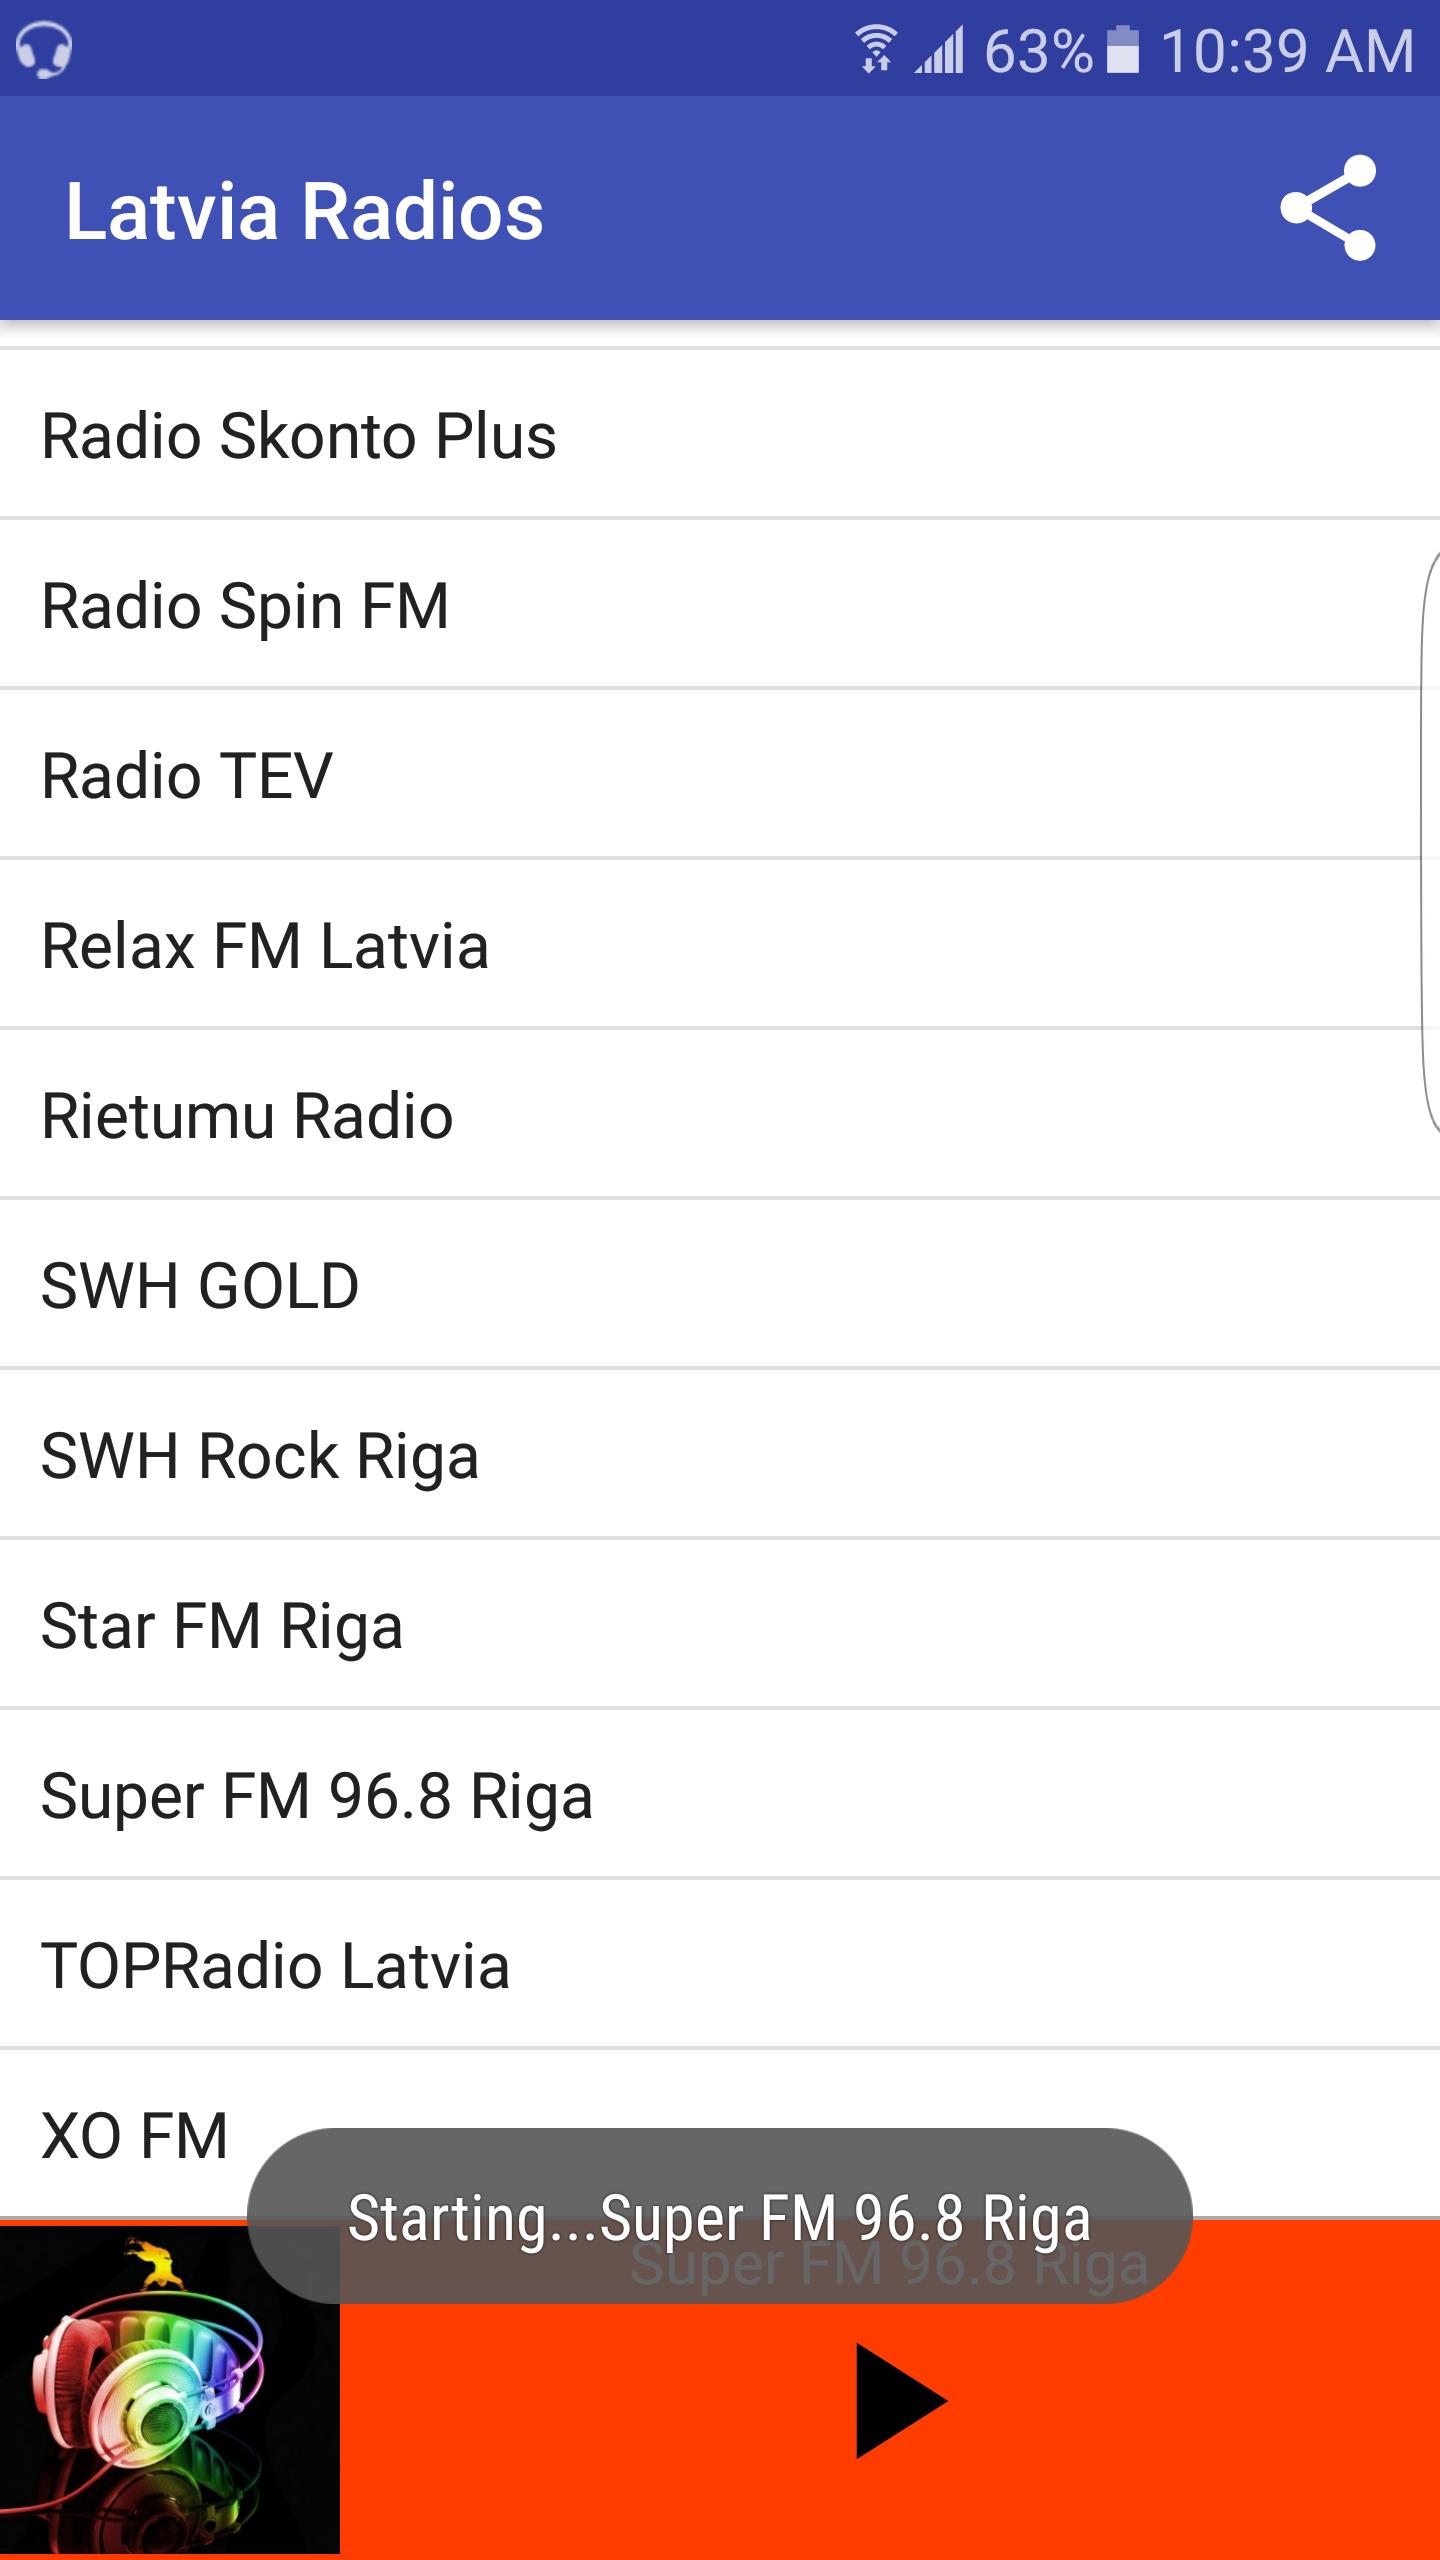 Latvia Radios for Android - APK Download